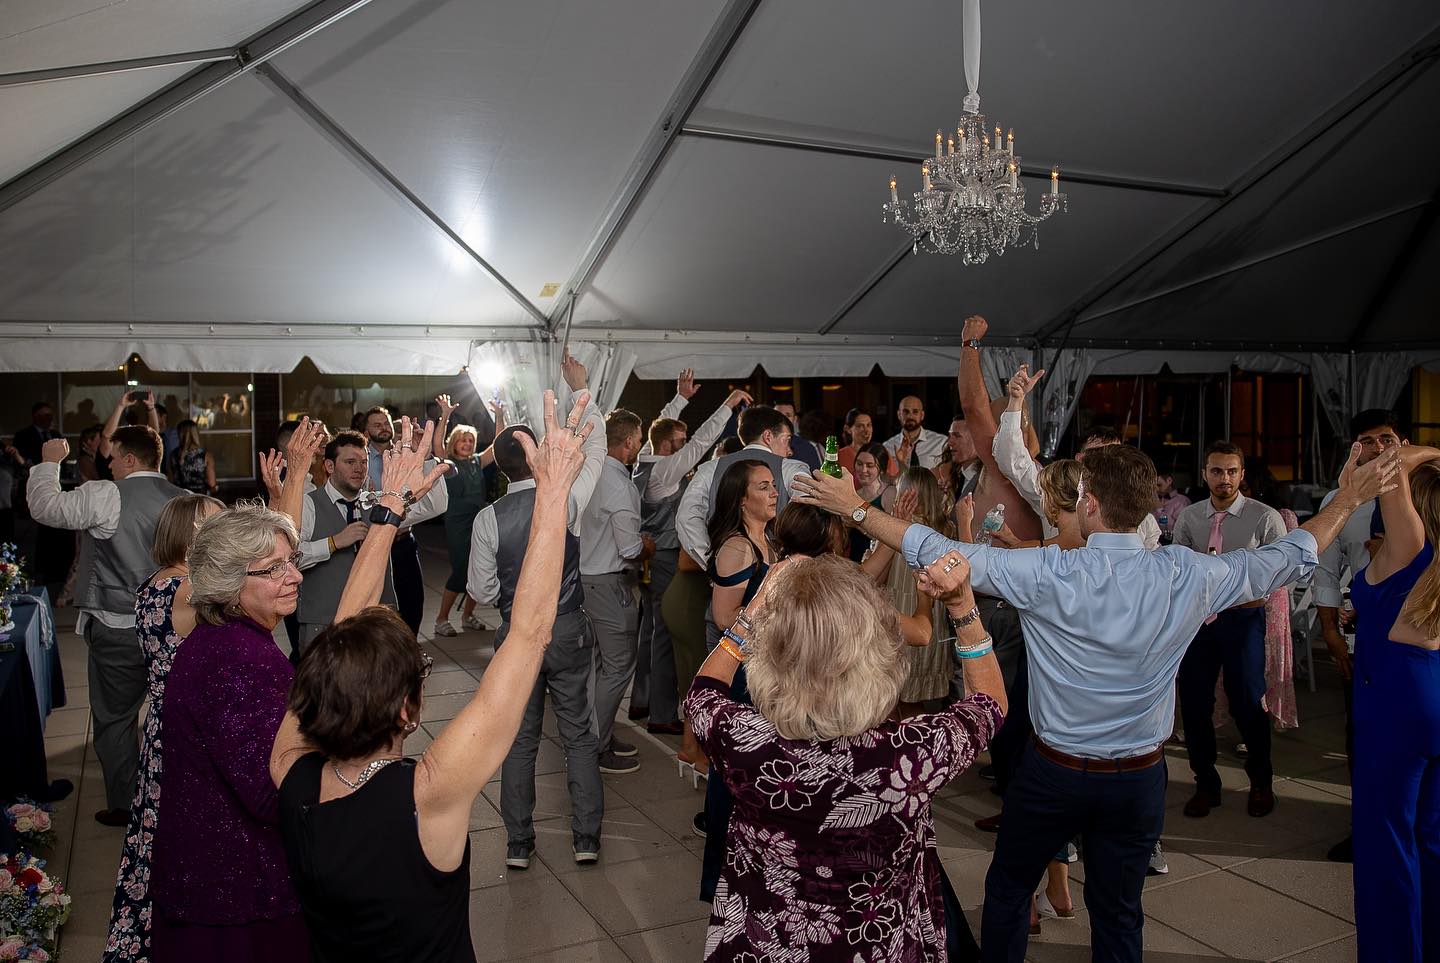 Big crowd of people at a wedding dancing to music